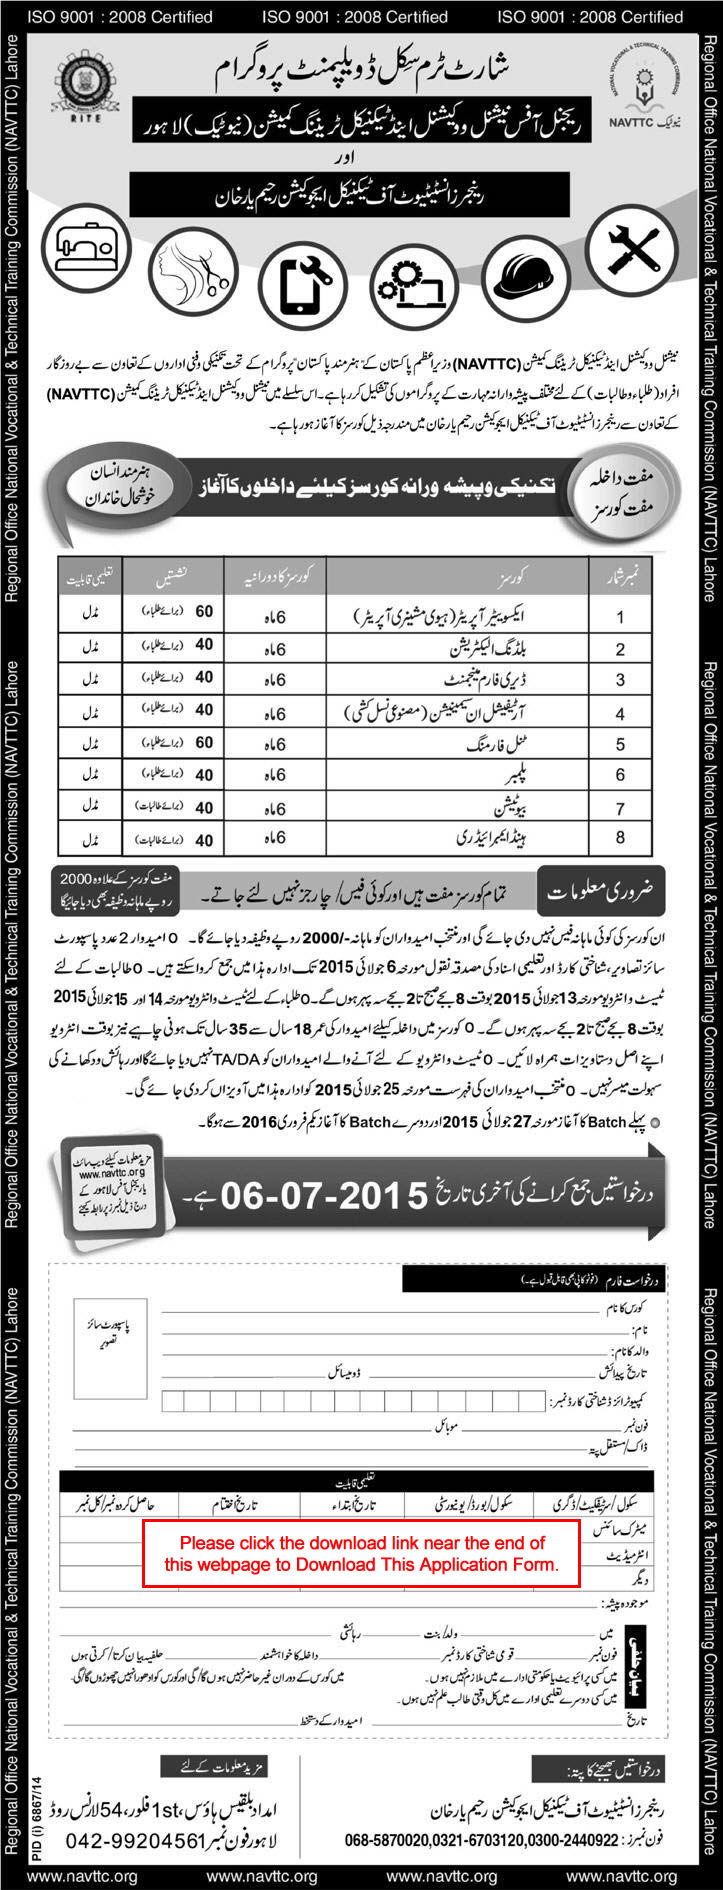 Free Training Courses in Rangers Institute of Technical Education Rahim Yar Khan 2015 June NAVTTC